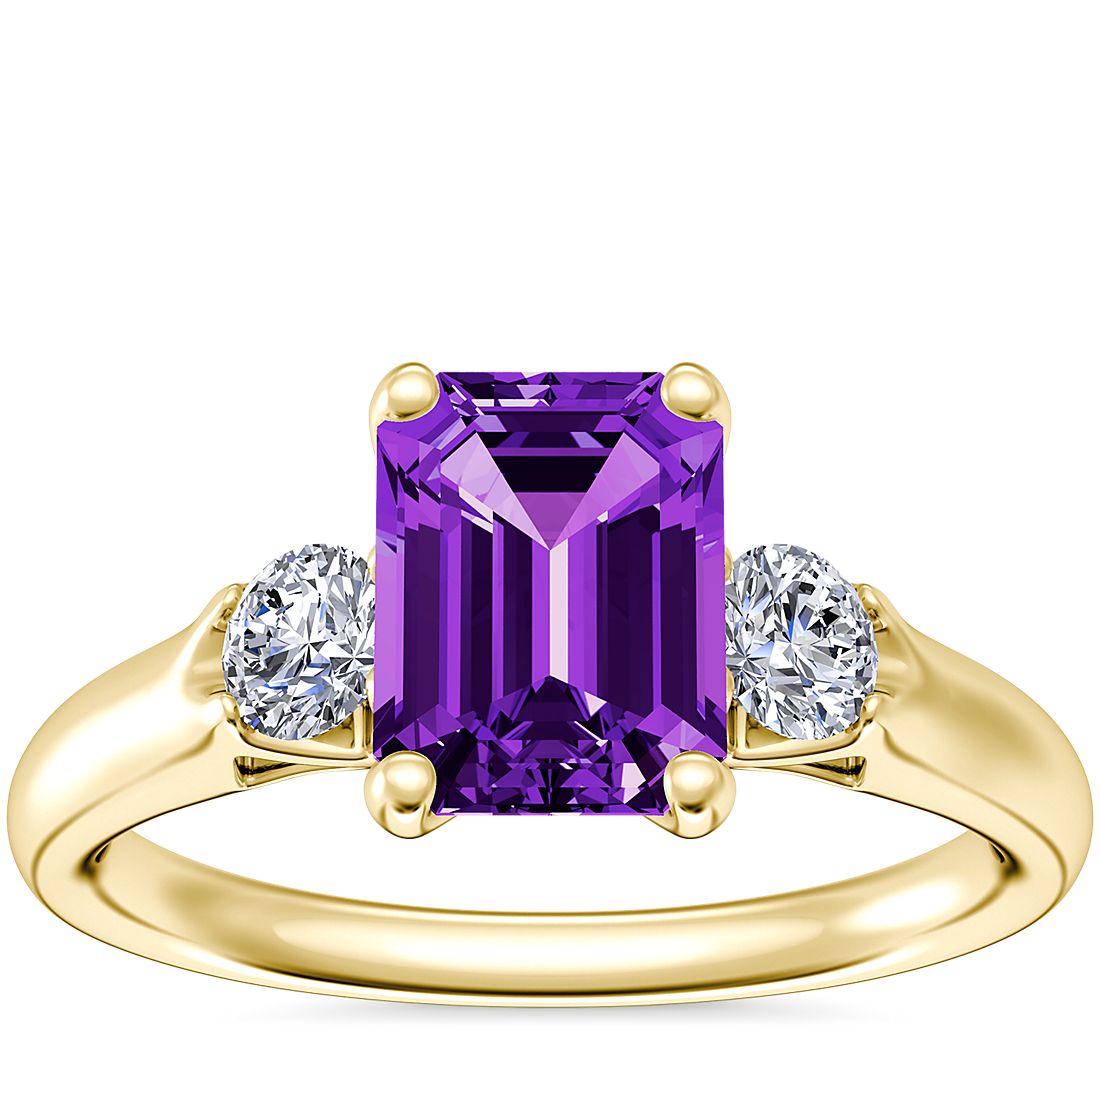 Classic Three Stone Engagement Ring with Emerald-Cut Amethyst in 18k Yellow Gold (8x6mm)